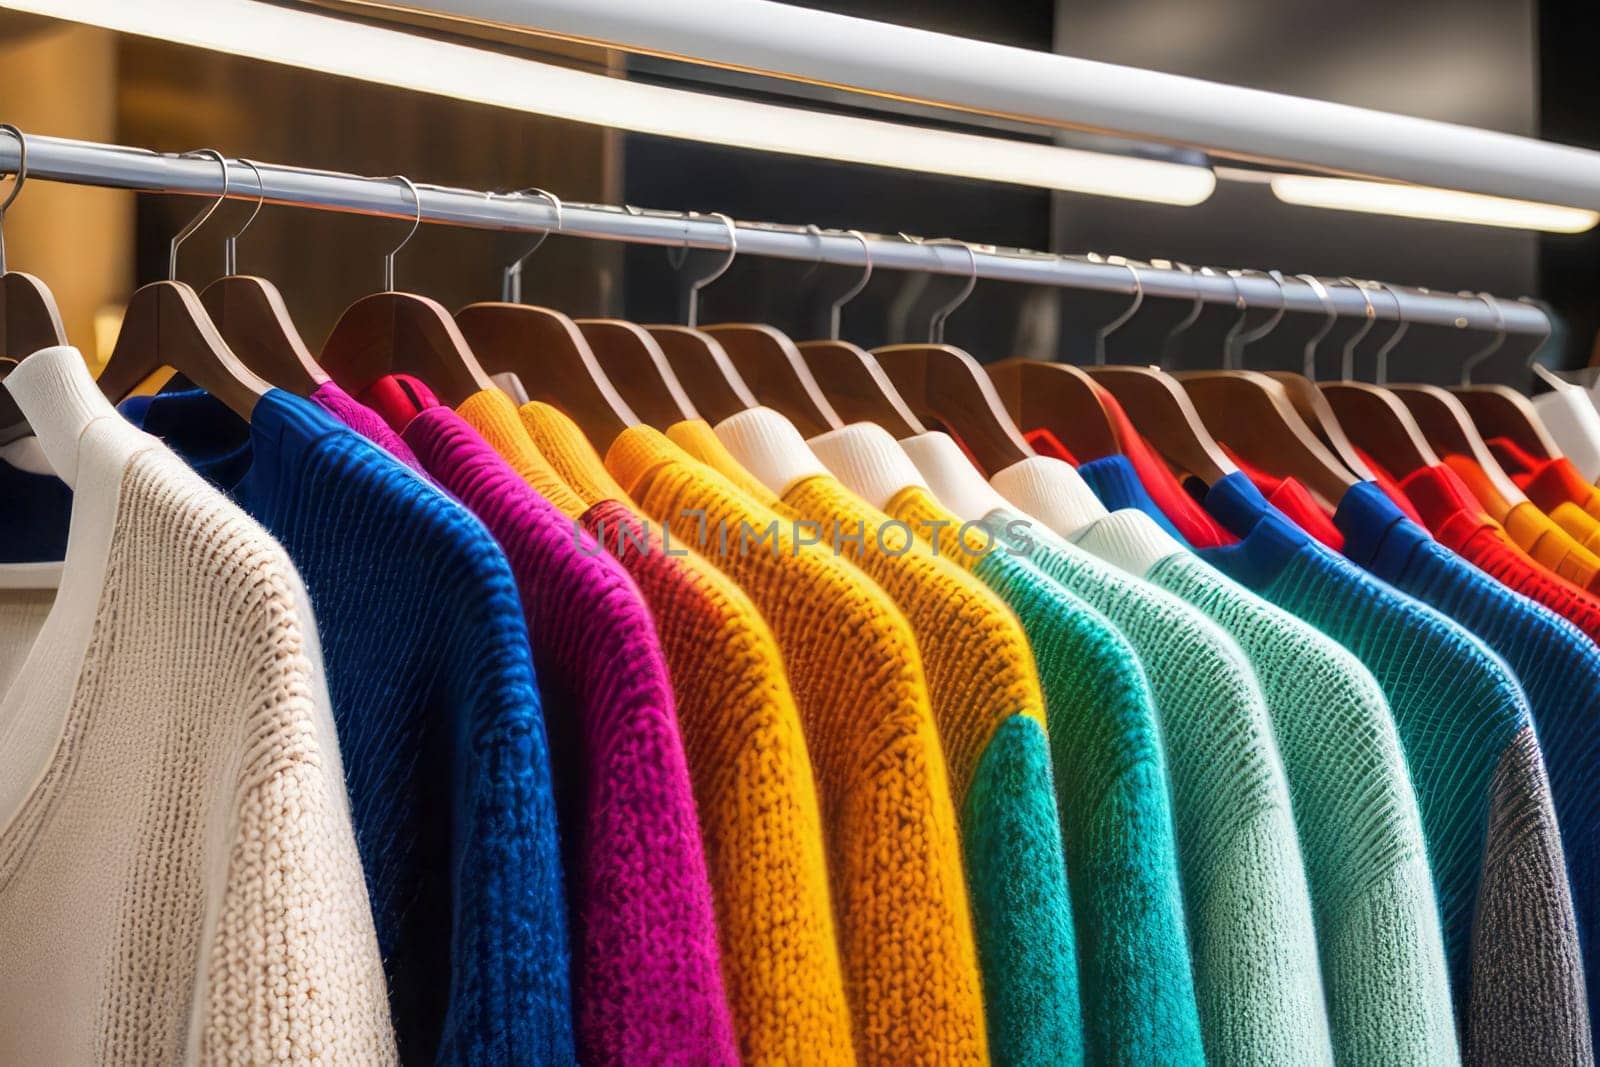 Vibrant sweaters showcased on hangers in a store, ready for shoppers